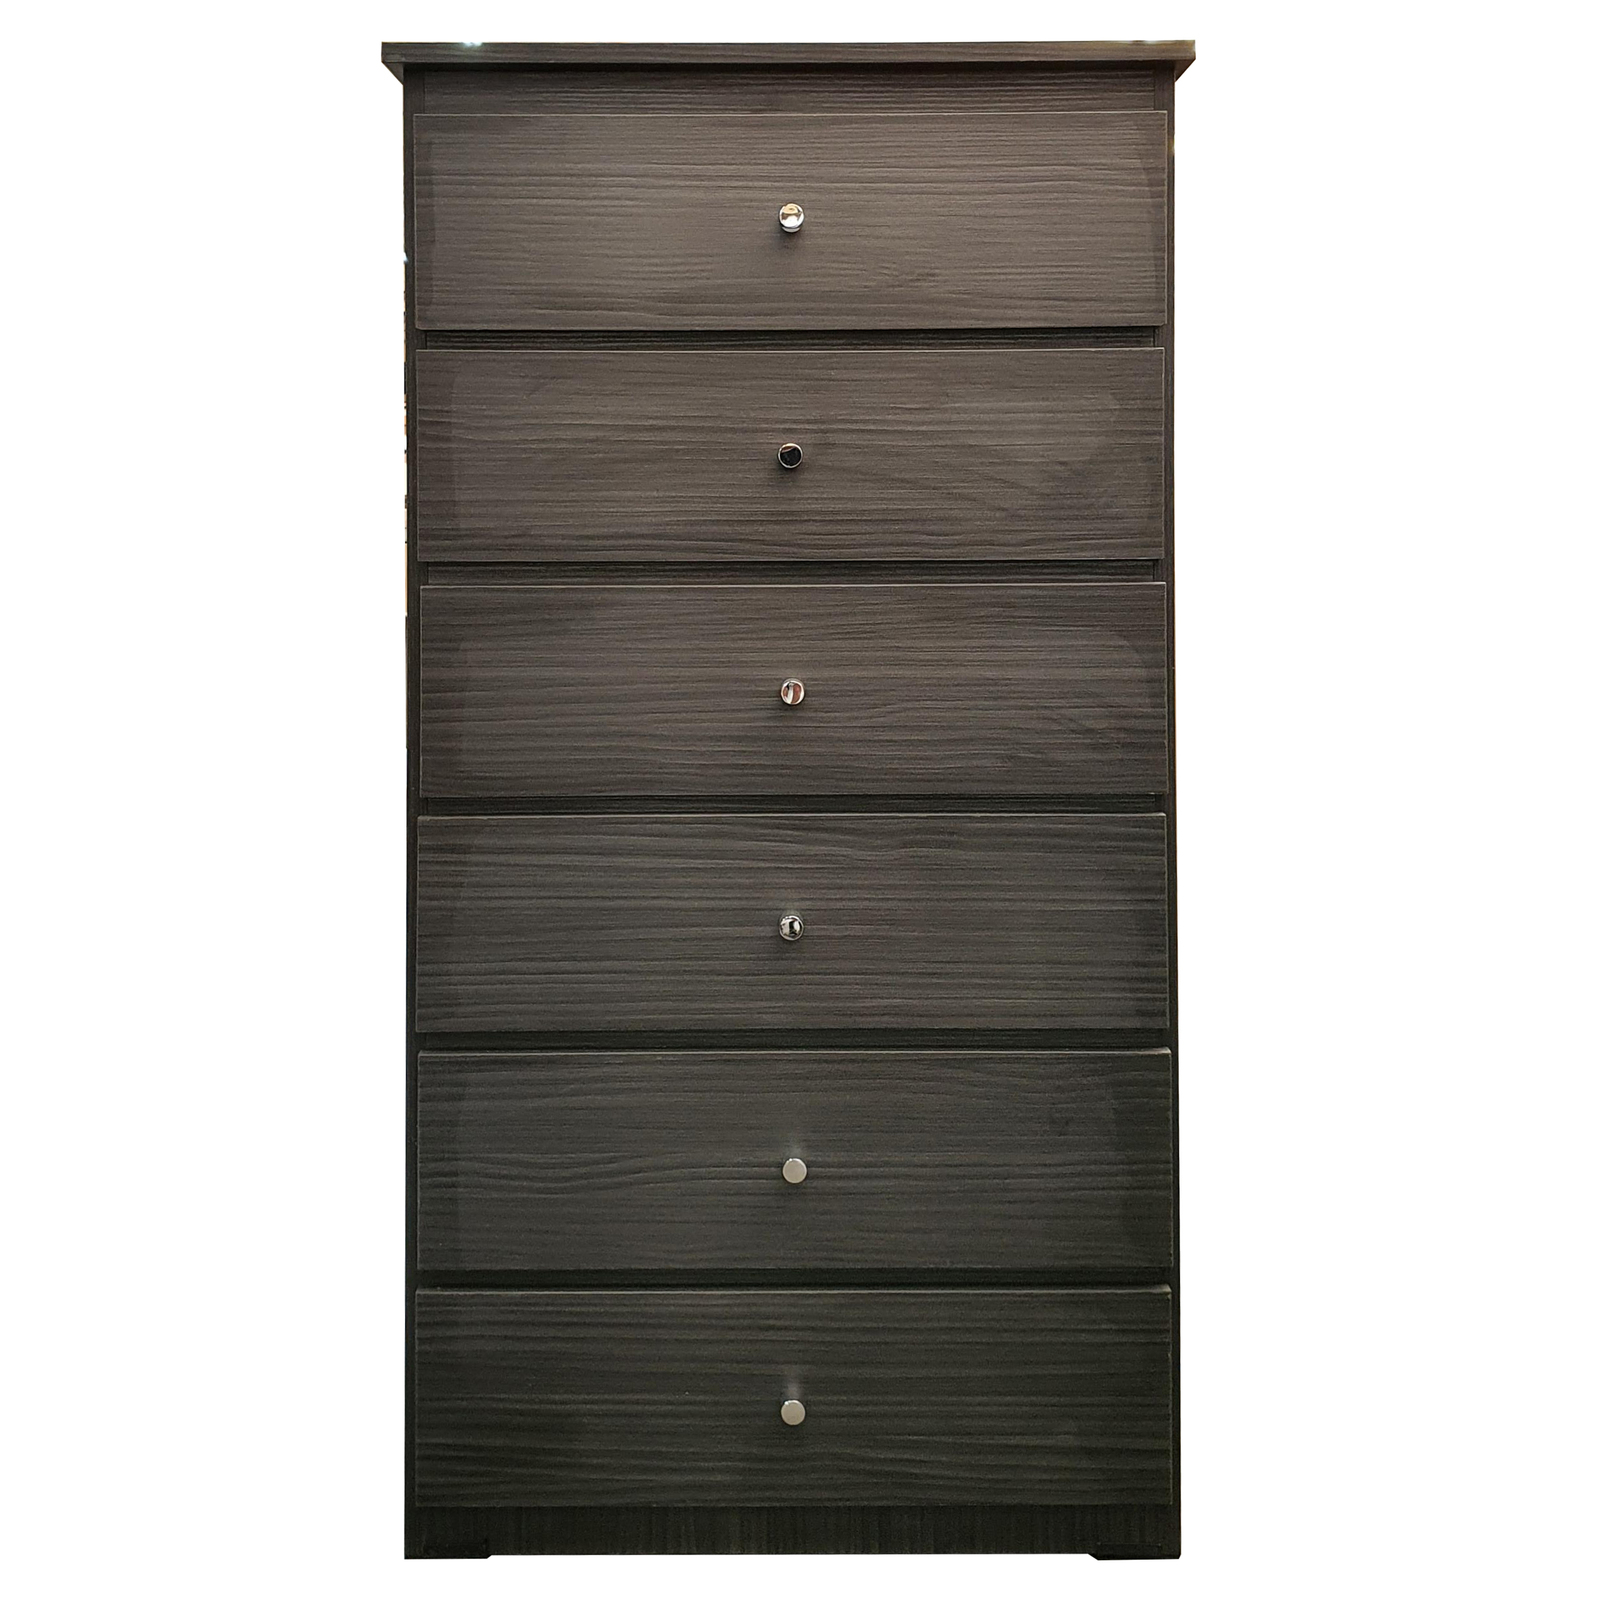 6 Drawer Chest of Drawers 600mm wide Bedroom Clothes Storage Cabinet Budget Melamine Charcoal BC 4A